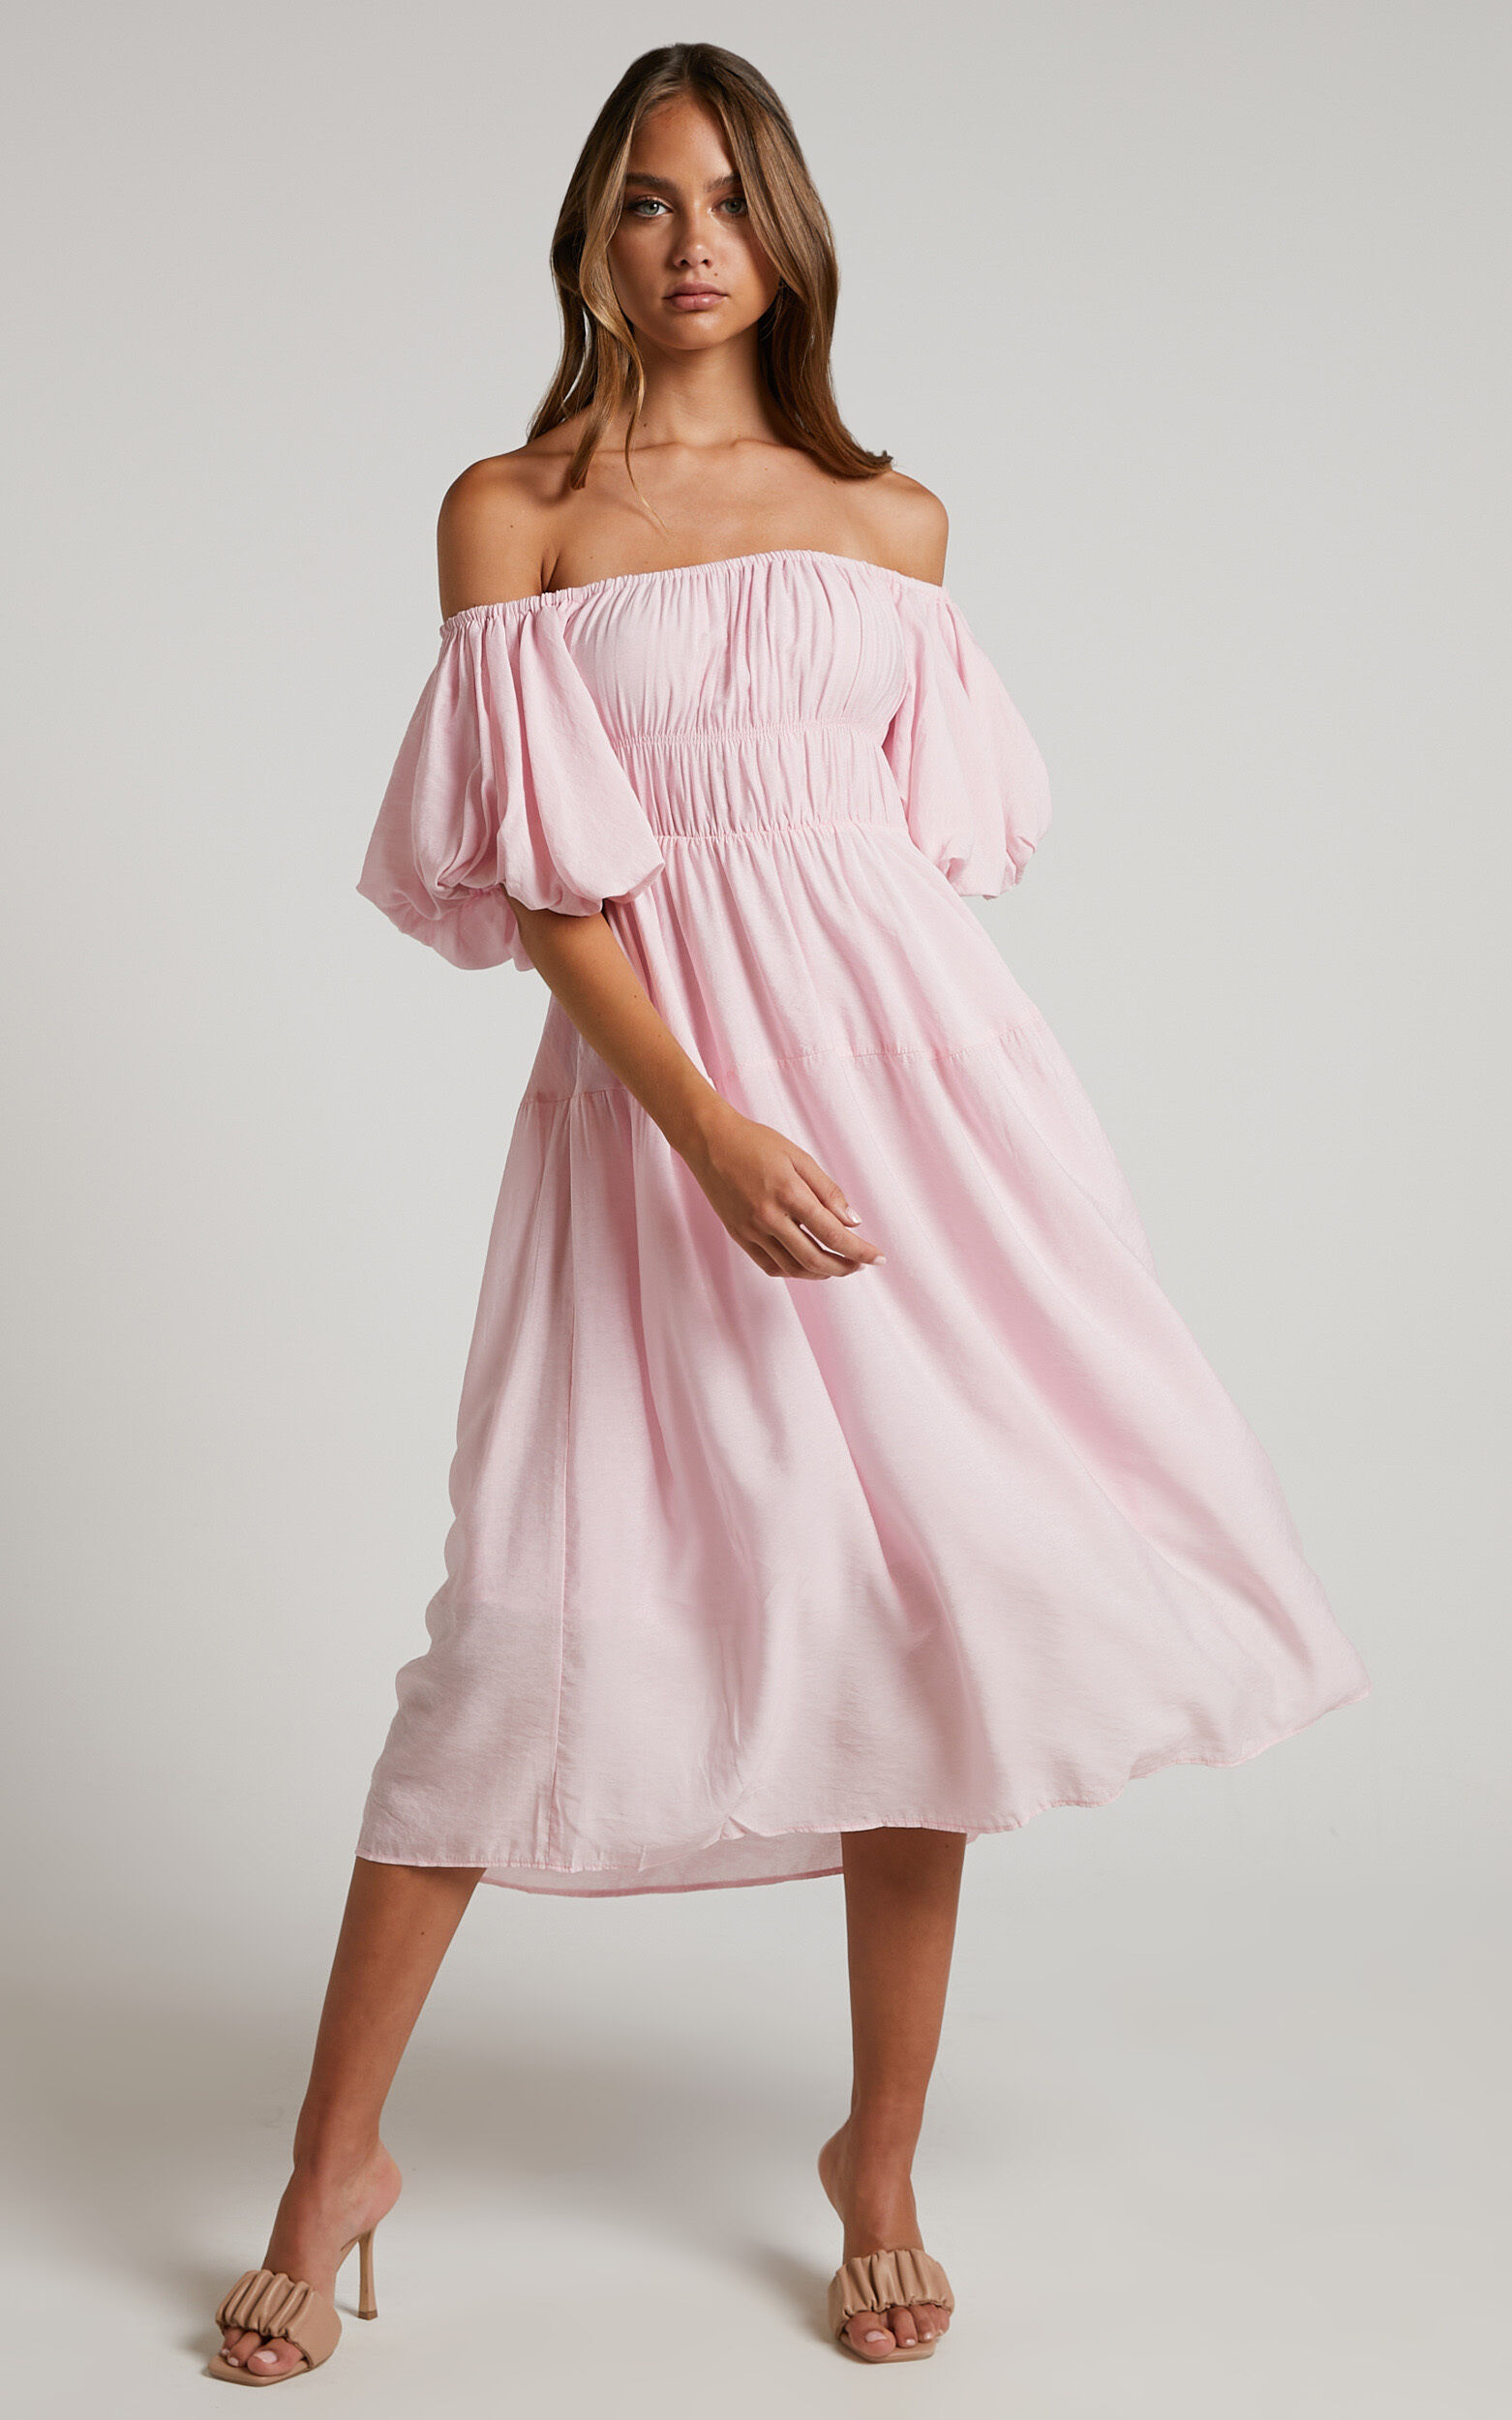 Peyton Midi Dress - Off Shoulder Puff Sleeve Tiered Dress in Pale Pink - 06, PNK1, super-hi-res image number null